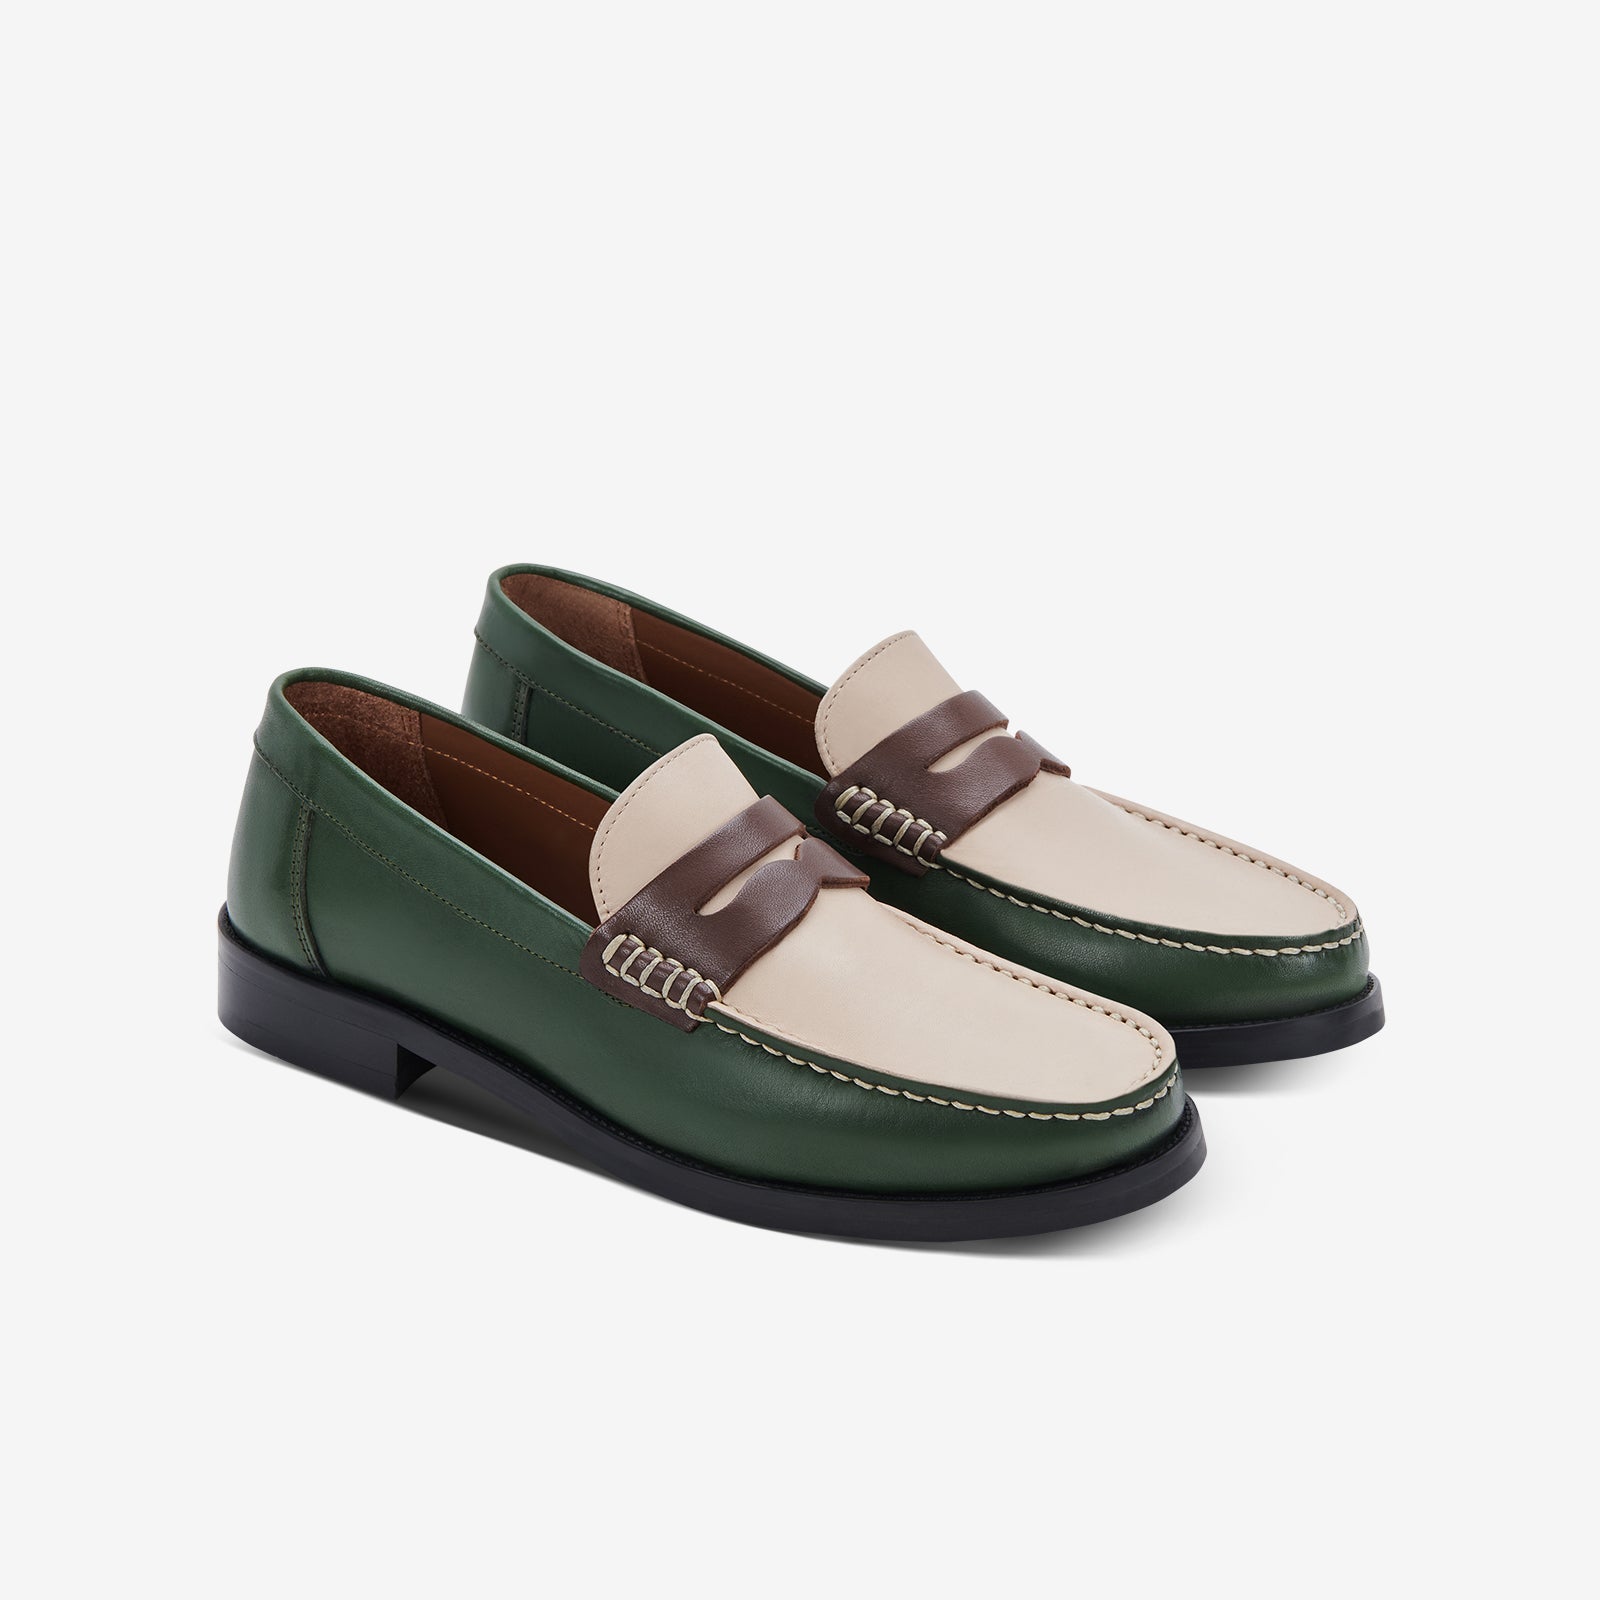 How to Get These Gucci Loafers That No One Else Will Have